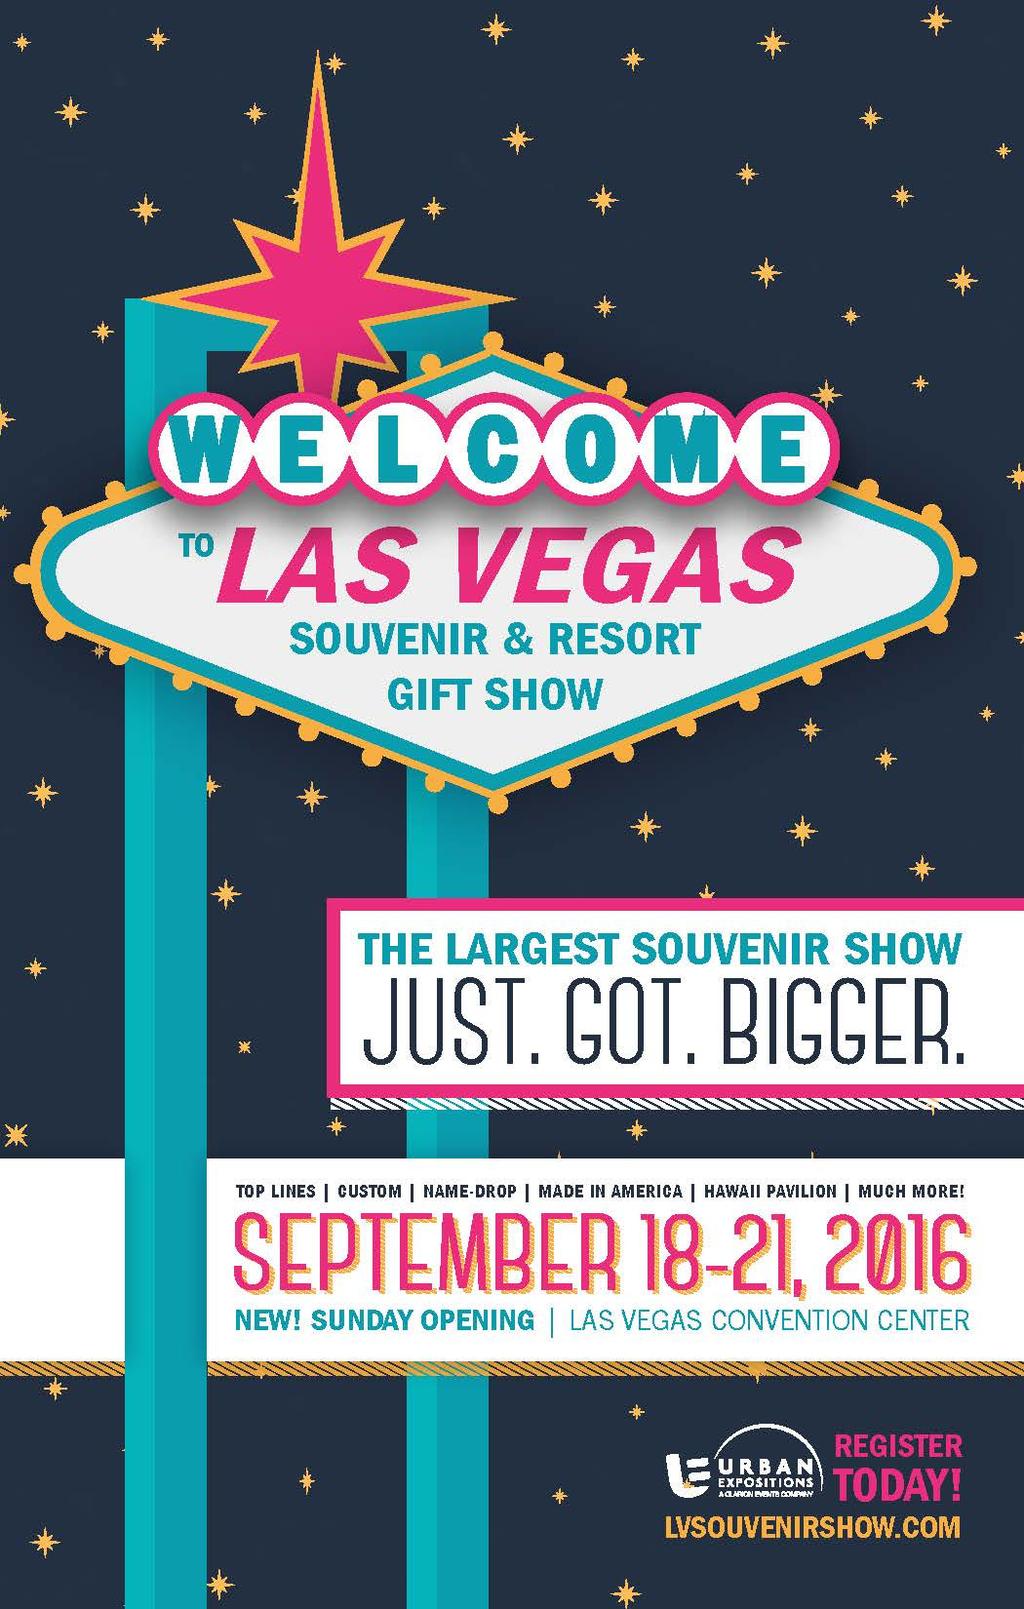 The Las Vegas show directory is handed out on-site to all registered attendees featuring complete vendor information.